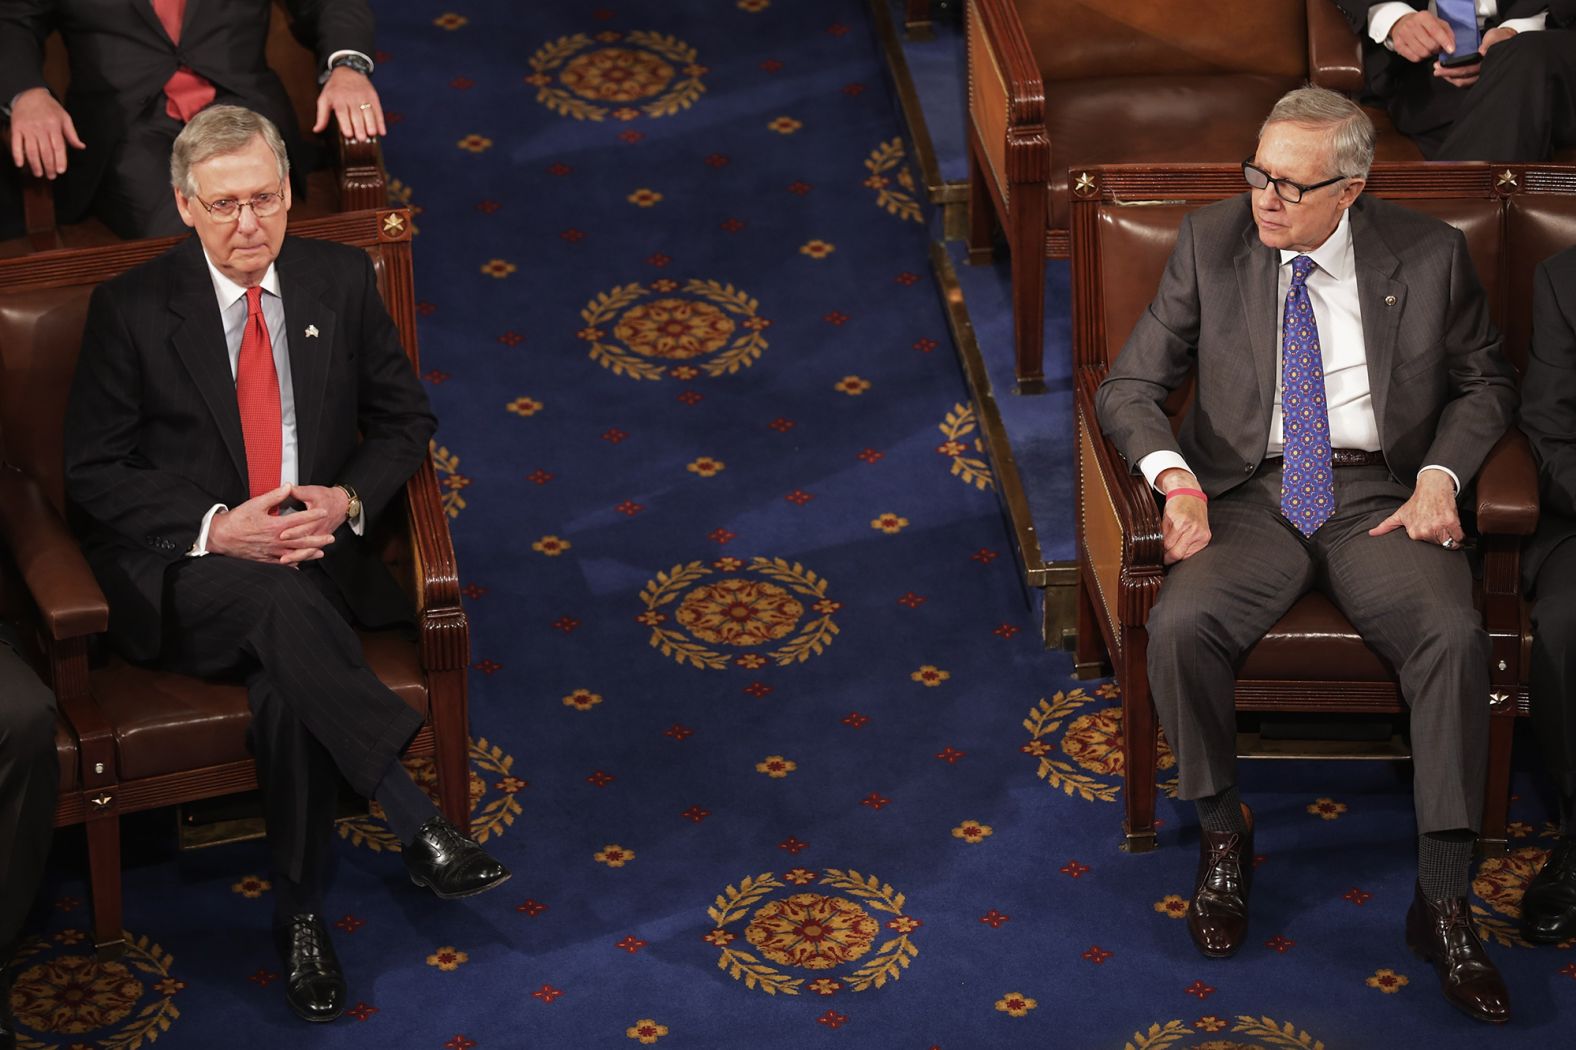 McConnell, left, sits across the aisle from Democratic Senate leader Harry Reid before a joint session of Congress in March 2015.